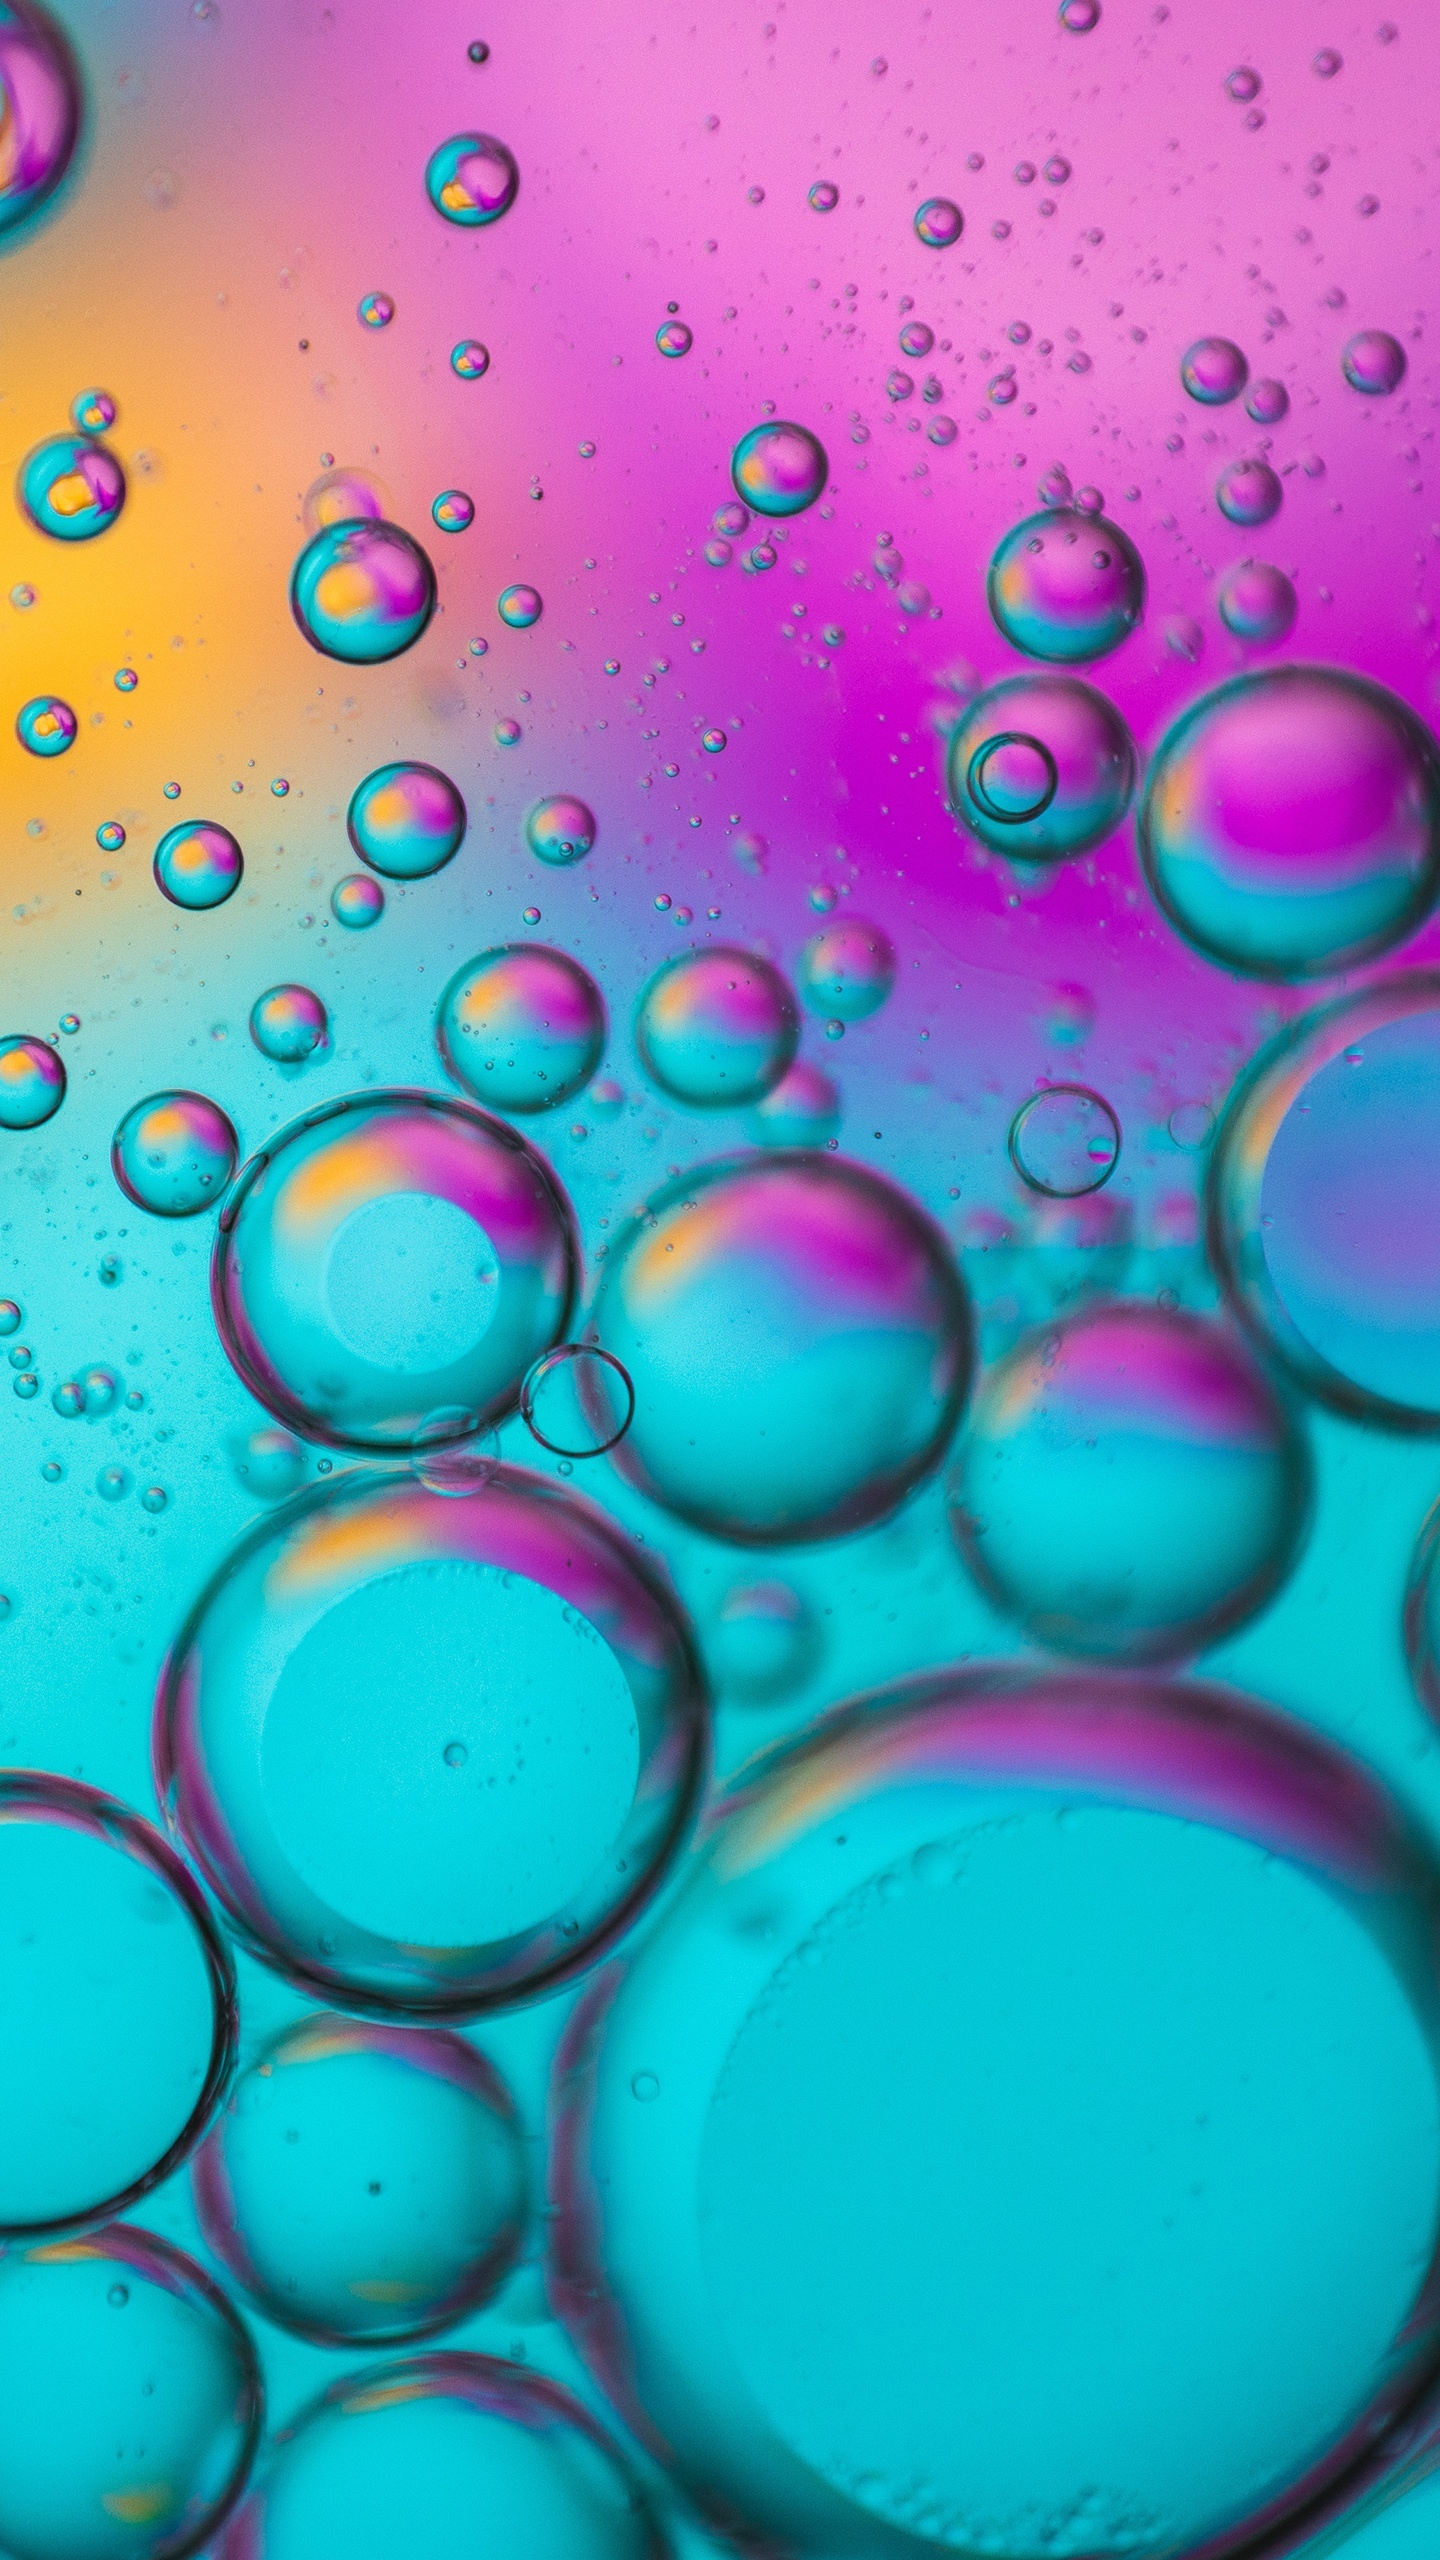 Bubbles wallpaper, Spectrum of colors, Abstract bubbles, Teal and pink gradients, Vivid bubble display, 1440x2560 HD Phone